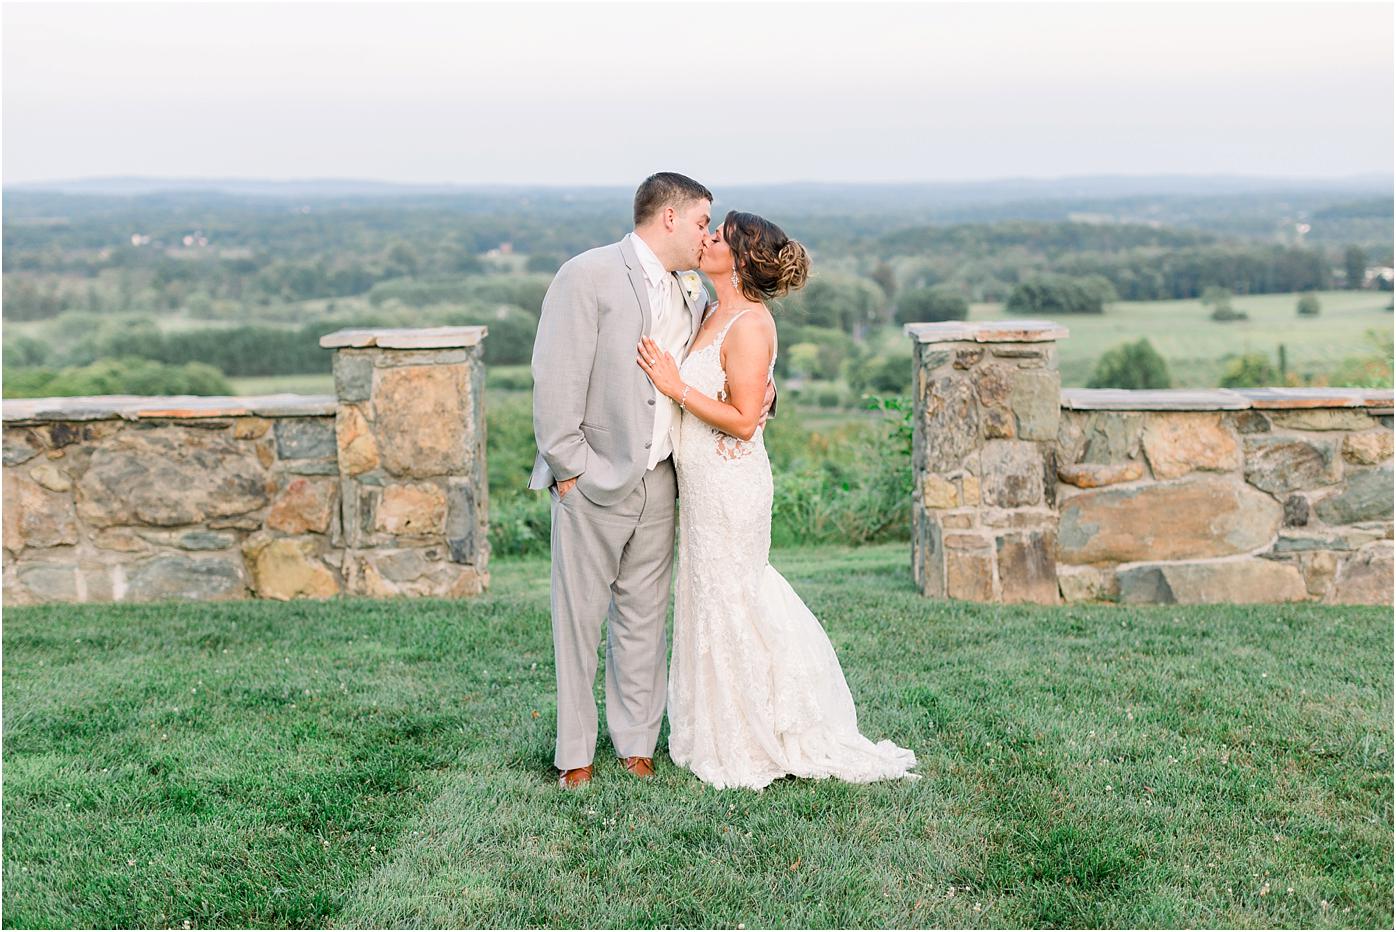 Bride and groom portrait in front of stunning views of Bluemont, Virginia at Bluemont Vineyards wedding venue